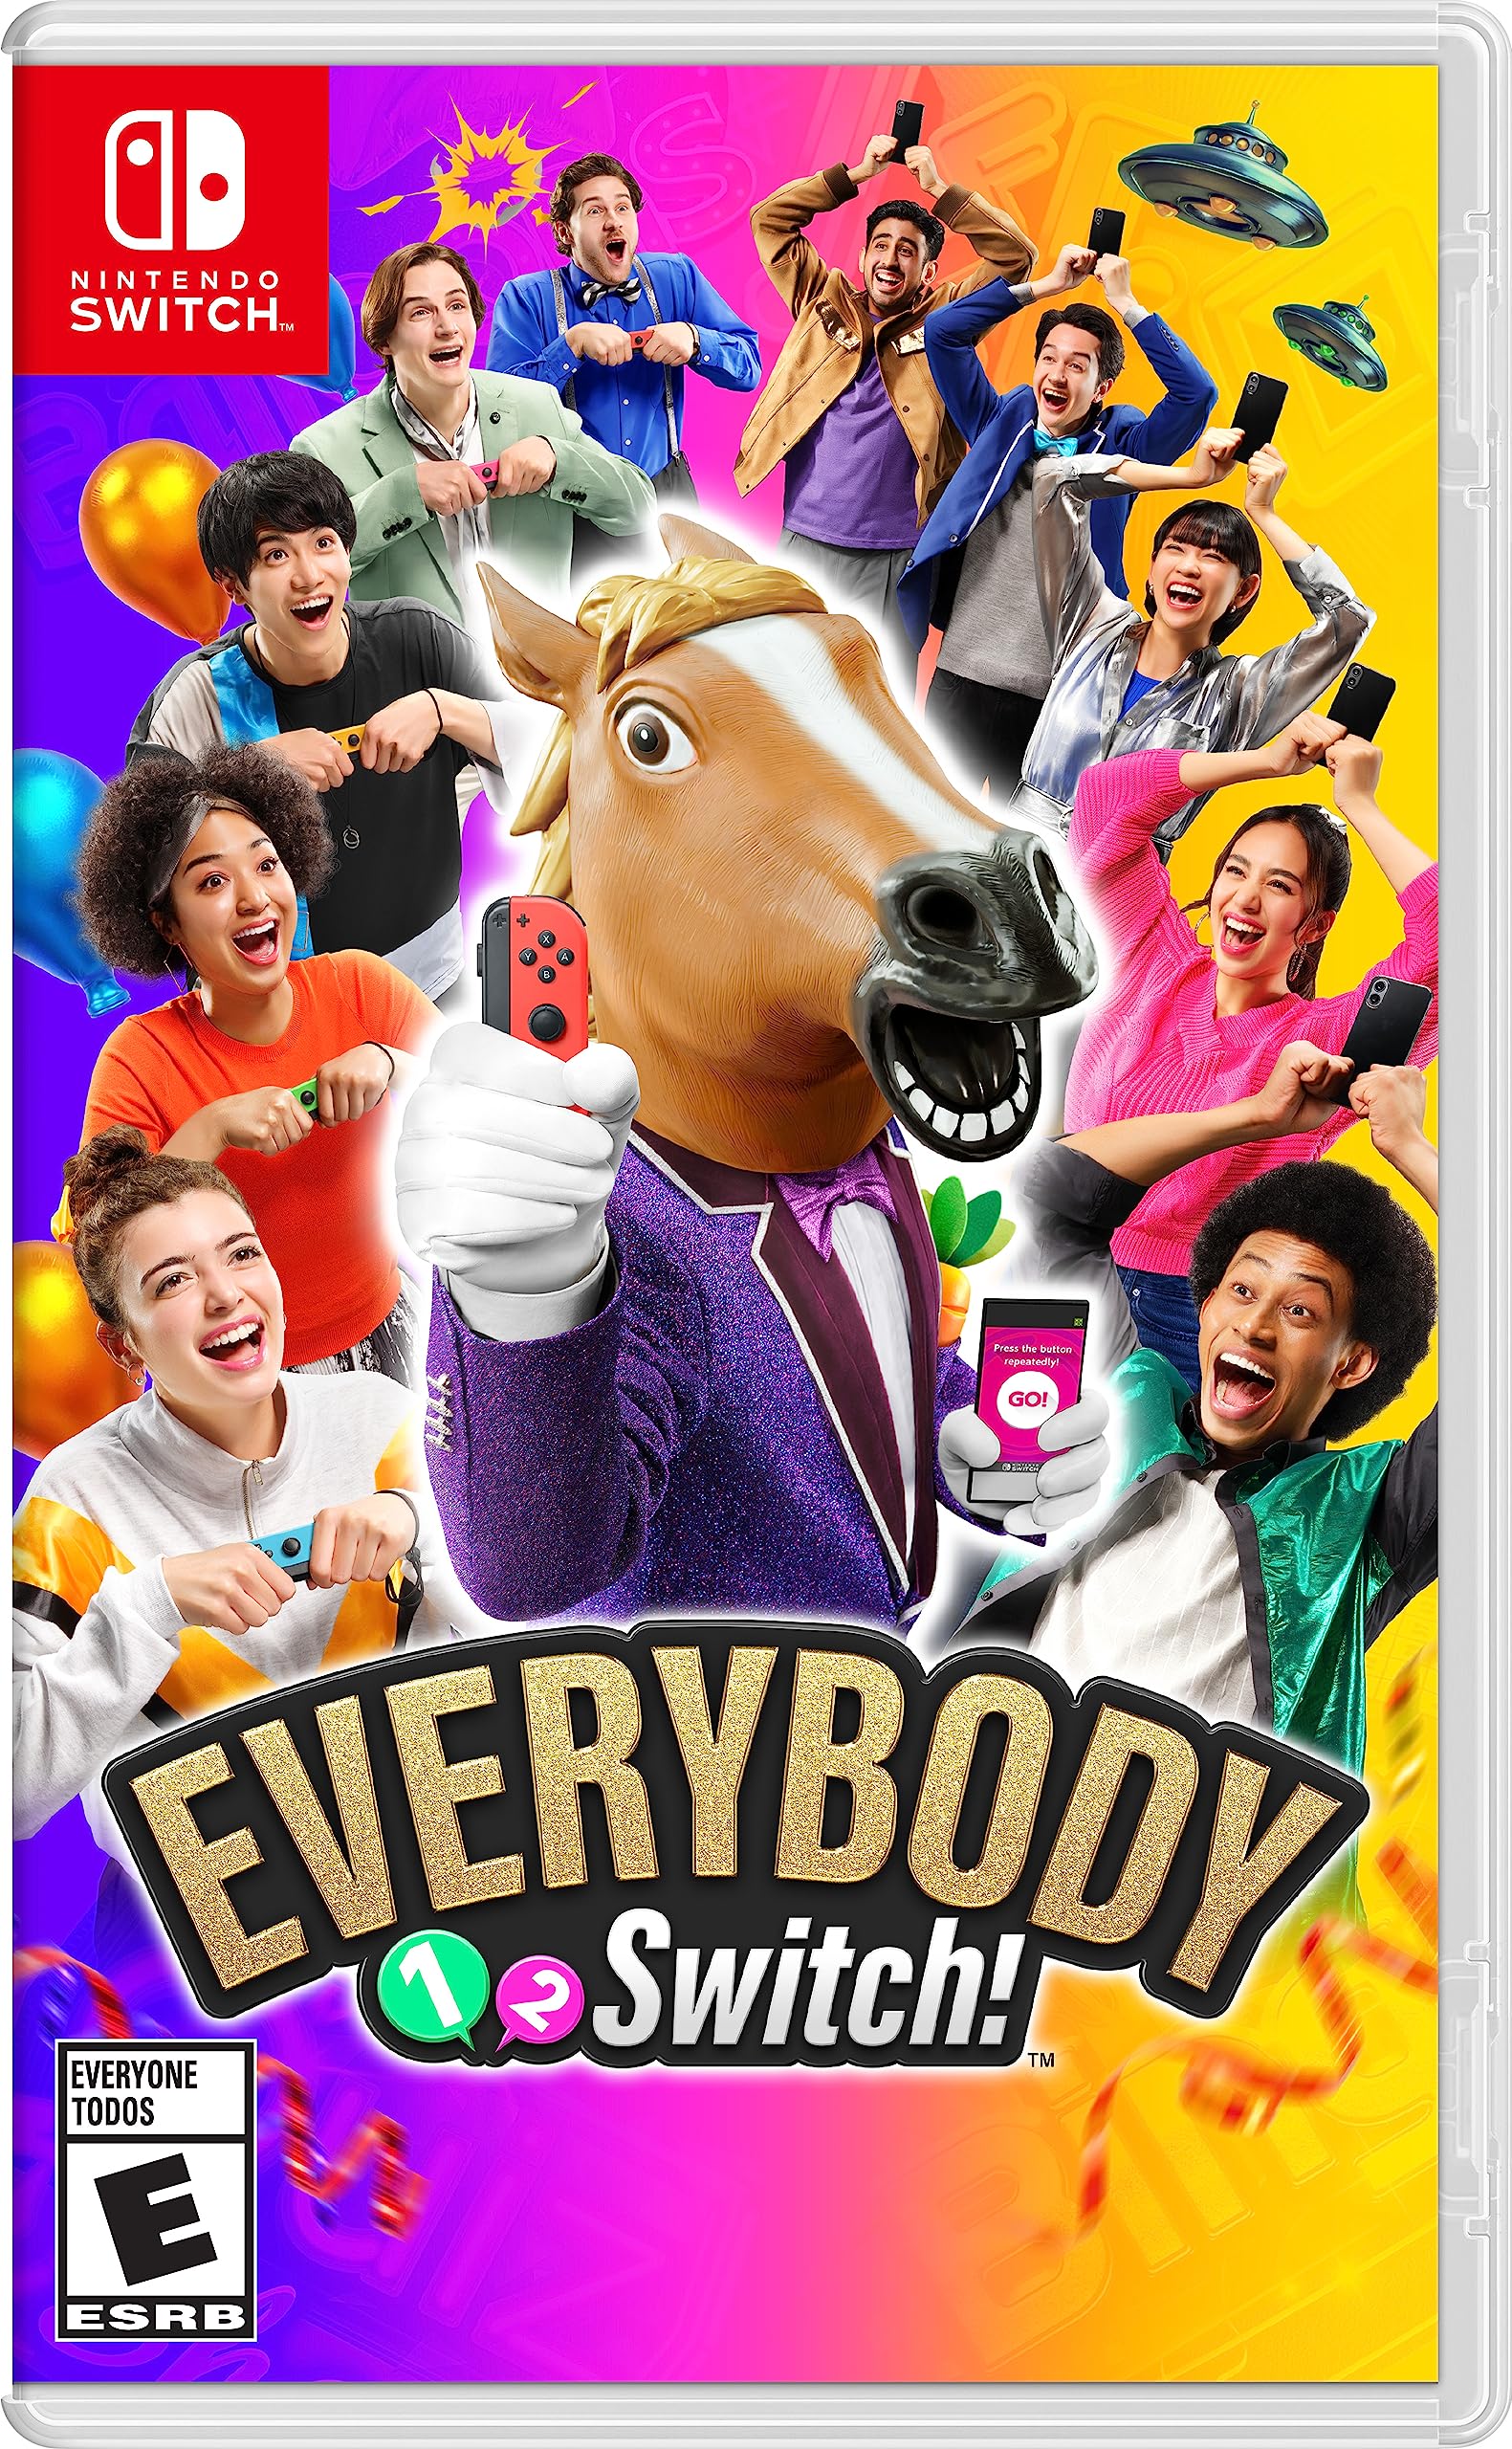 Everybody 1-2 Switch! (Nintendo Switch) $10 + Free Shipping w/ Prime or on orders over $35